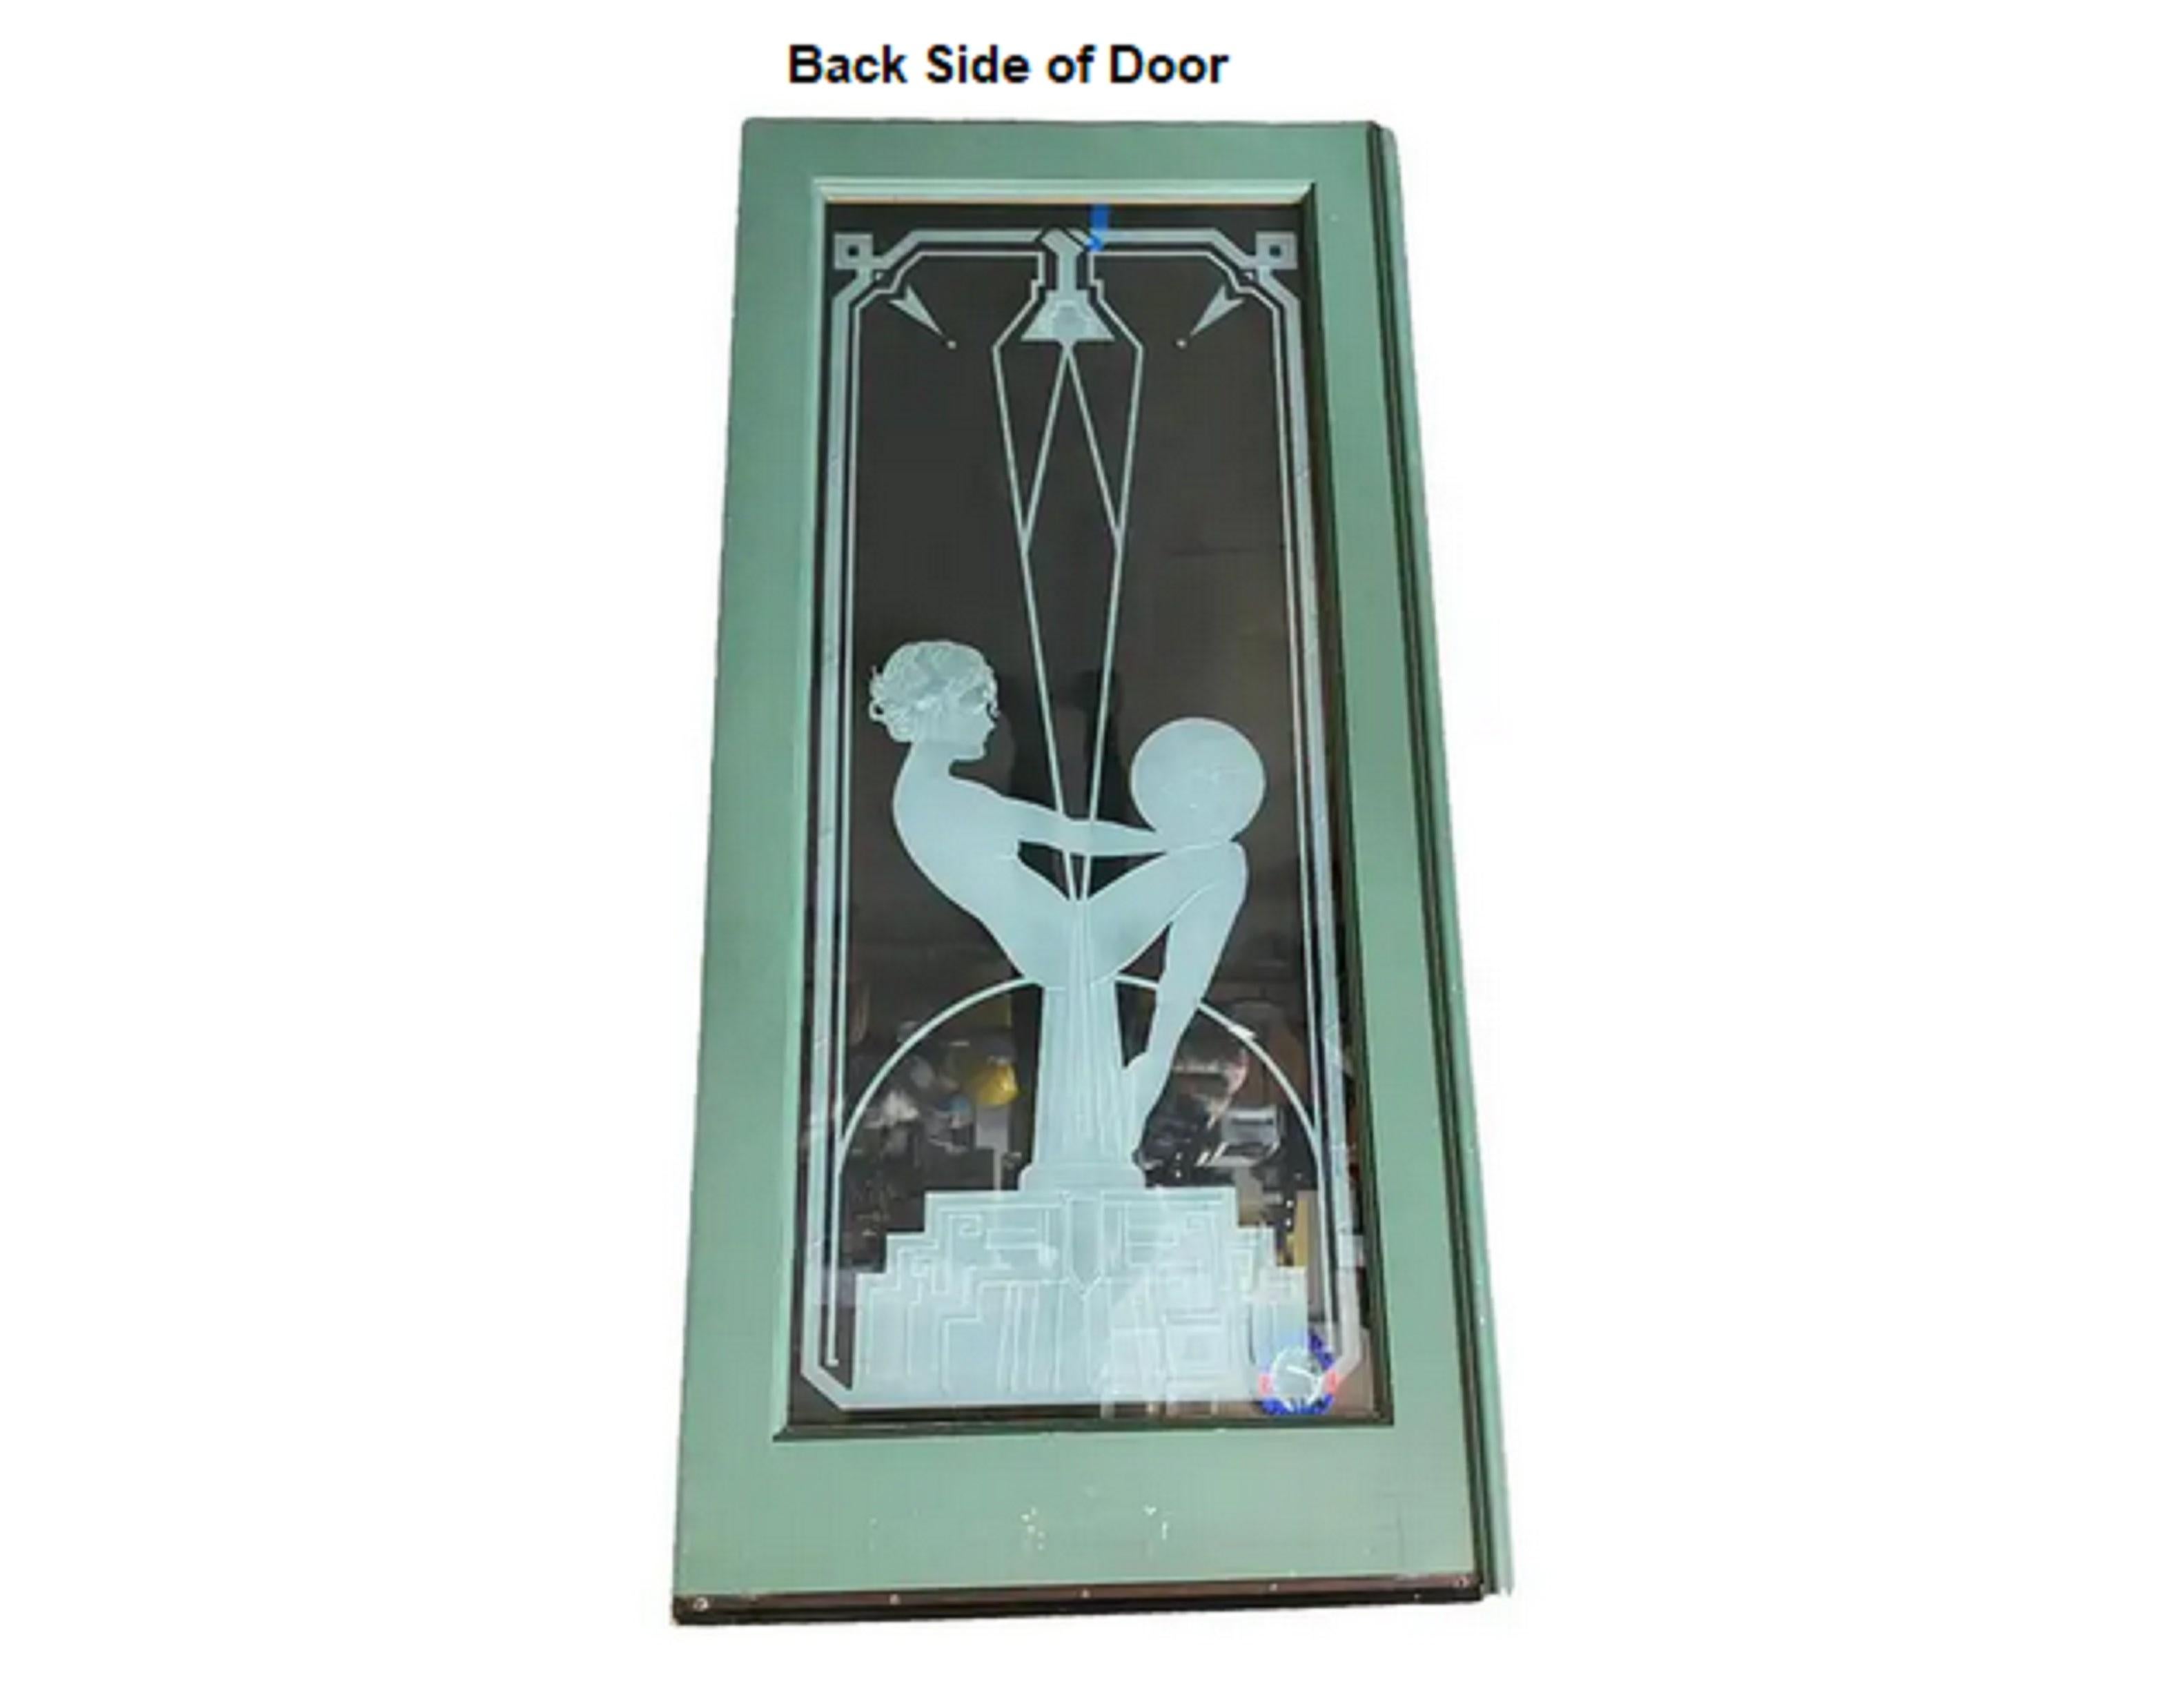 Custom-made hand-etched/cut art glass door, featuring a nude flapper girl sitting on a stepped art deco obelisk modeled after the famous Biba statues of the 1920s. The custom glass pane is fixed to oak door frames and features relive cut 1/2